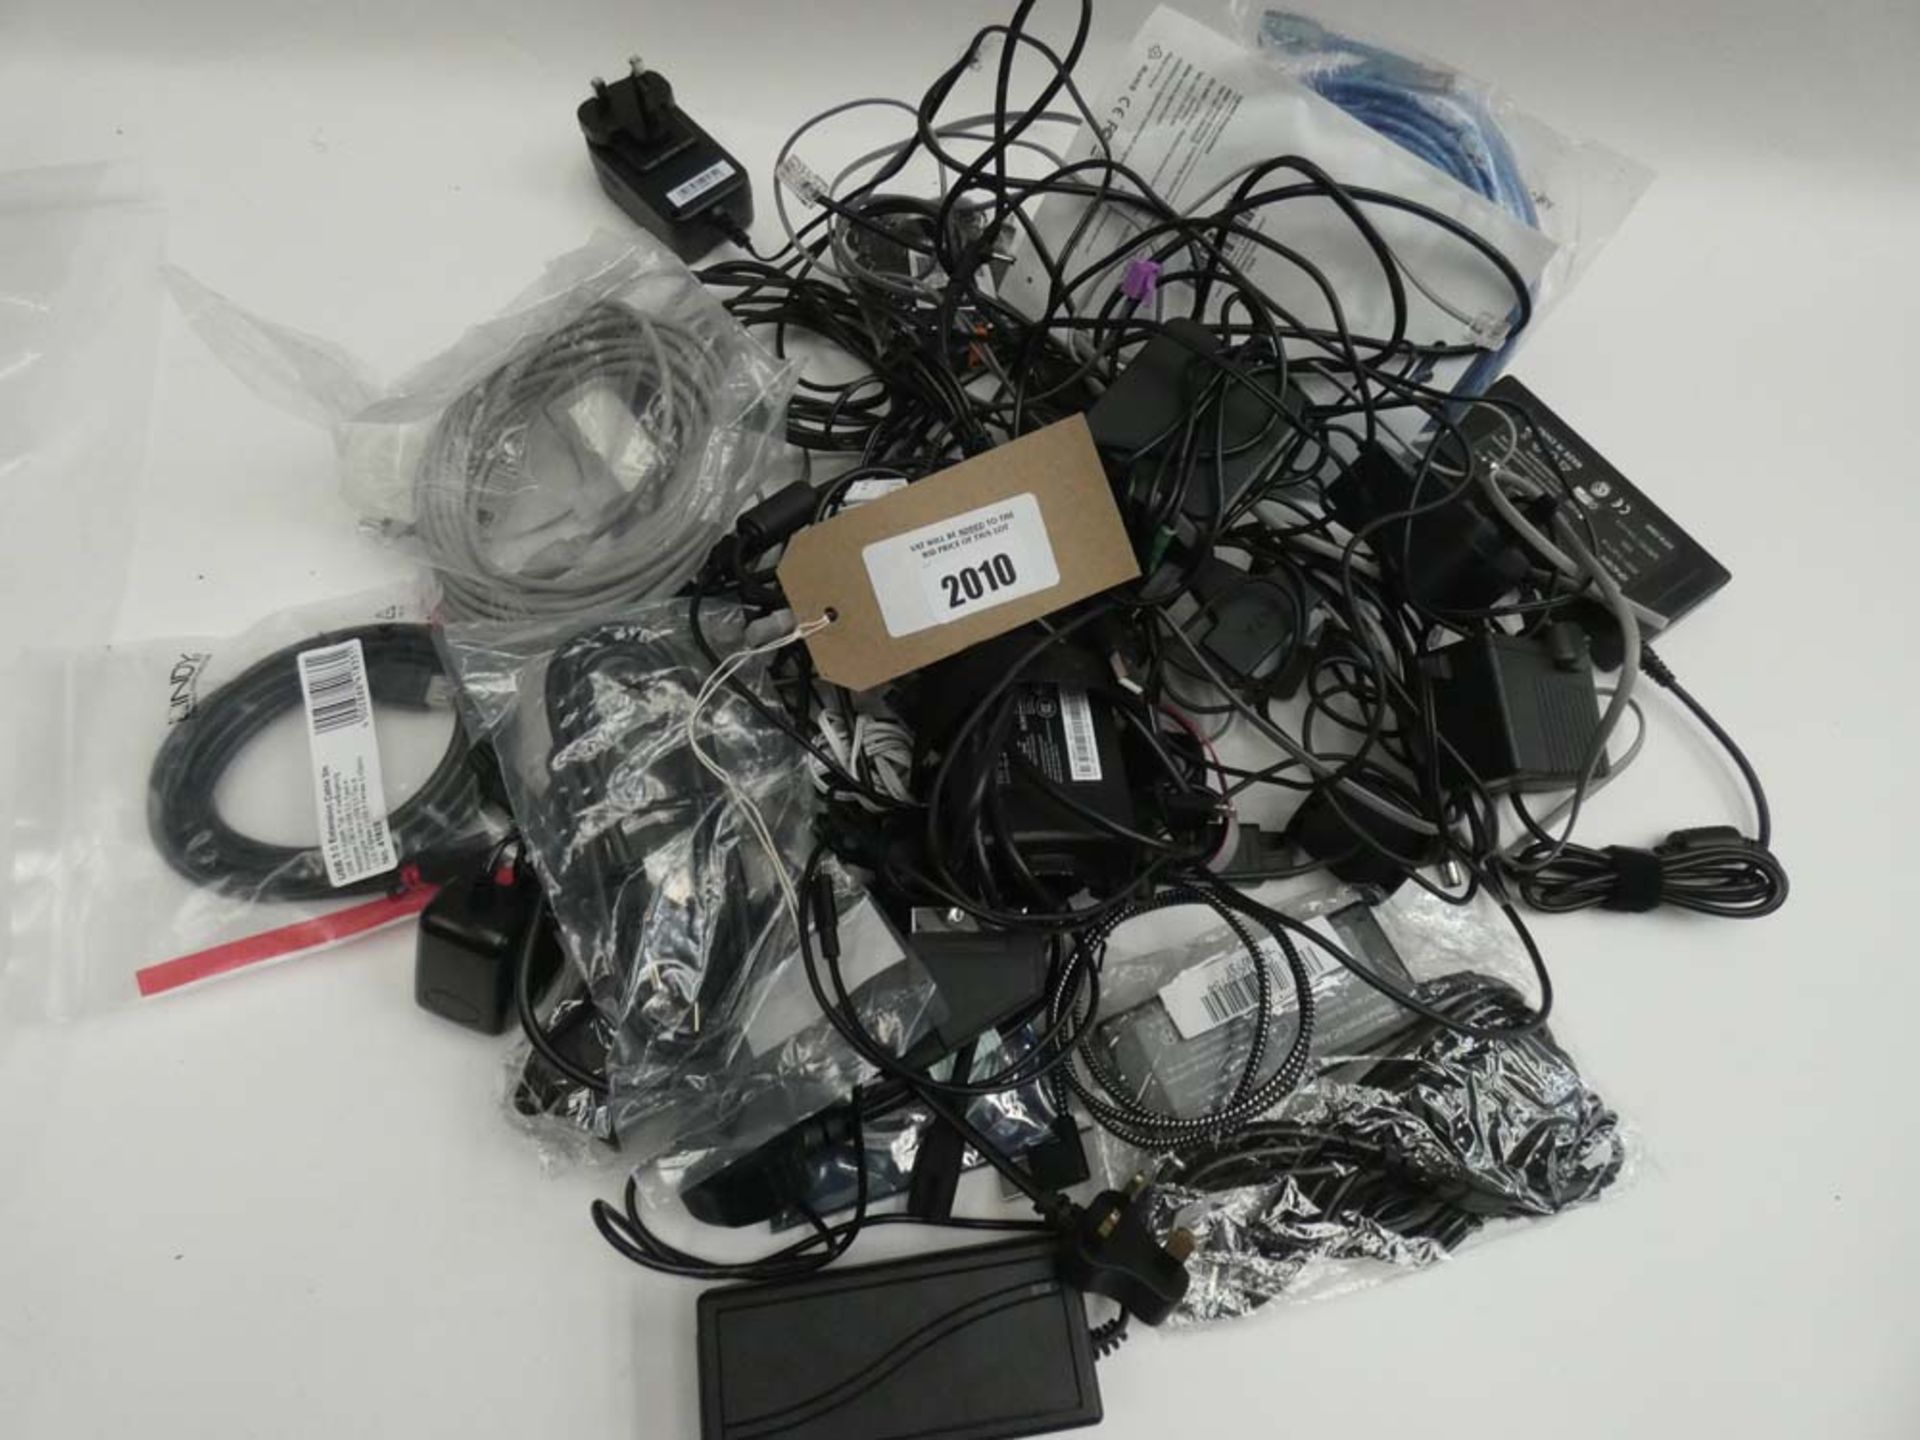 Bag containing mostly leads, cables and PSUs